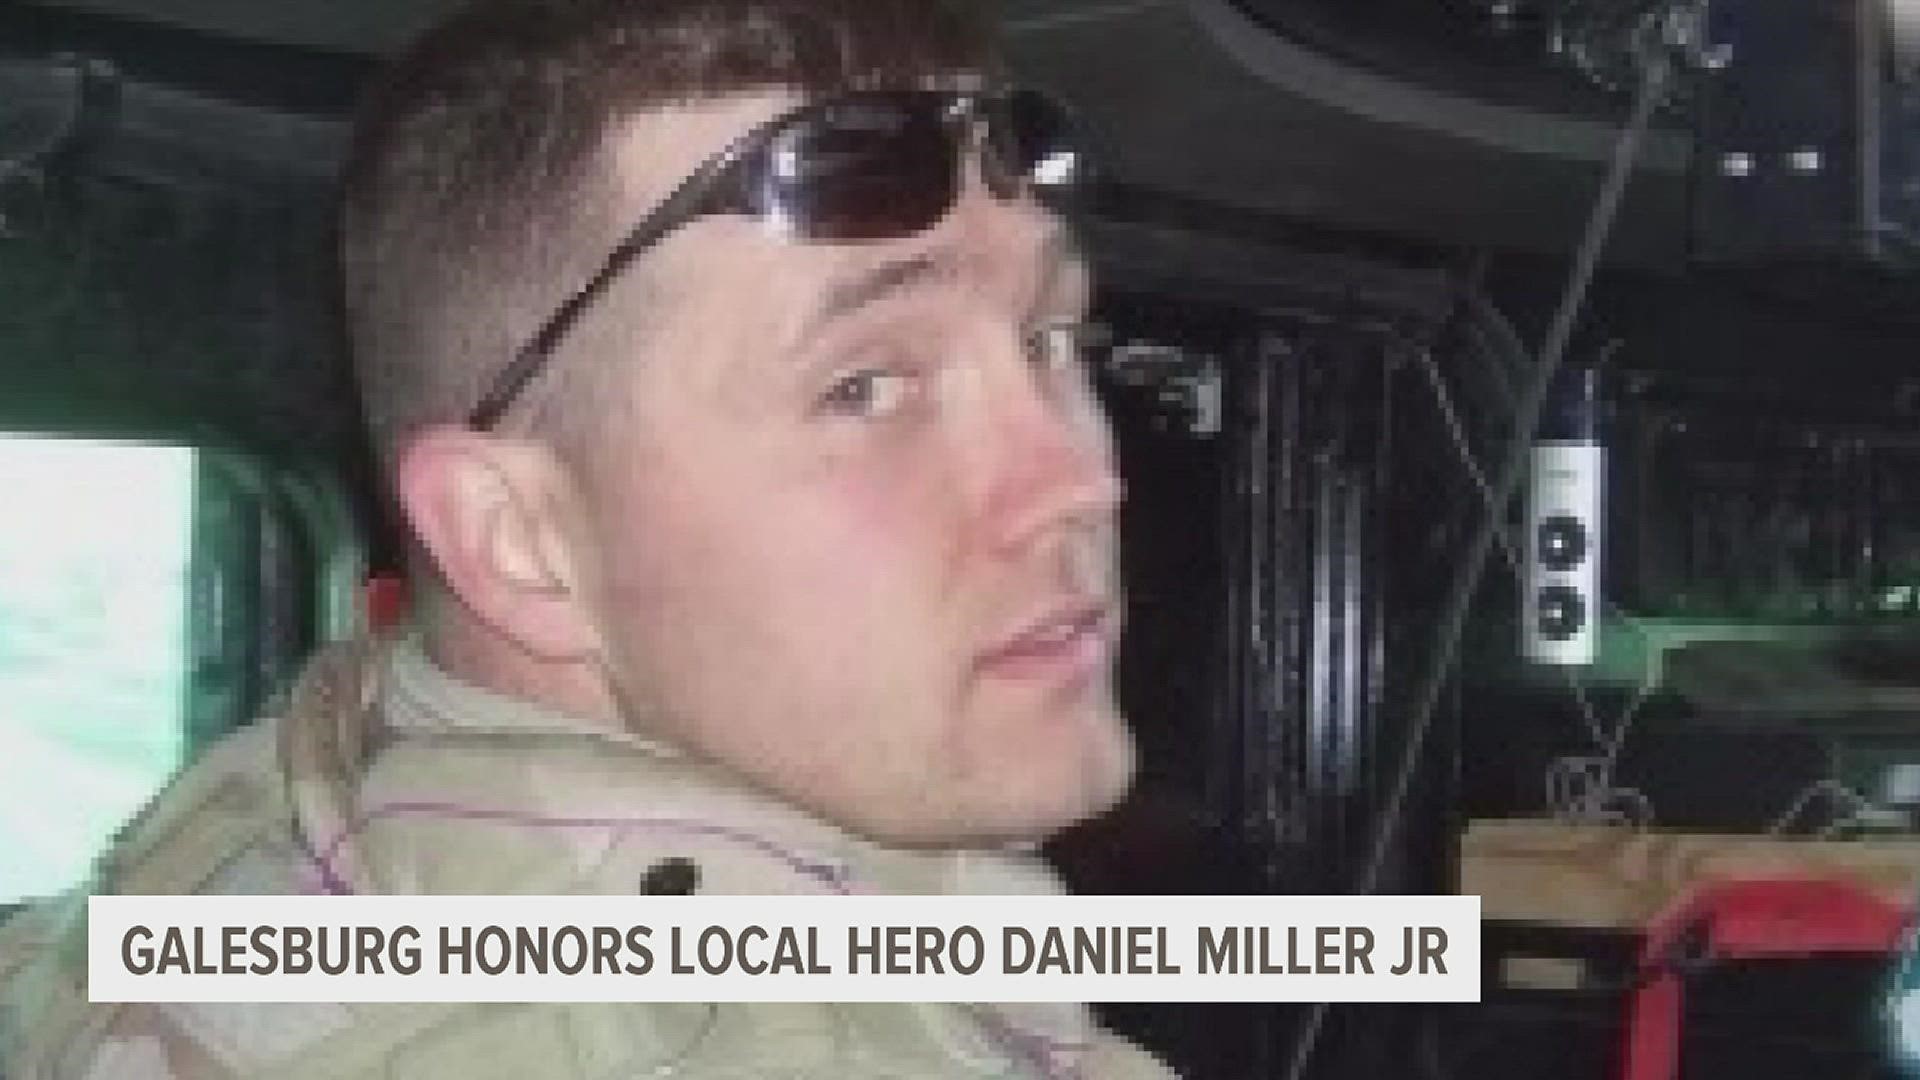 Galesburg renamed its post office to the 'Senior Airman Daniel Miller Post Office' to honor the late Daniel Miller Jr, a senior airman who was killed in Iraq in 2007